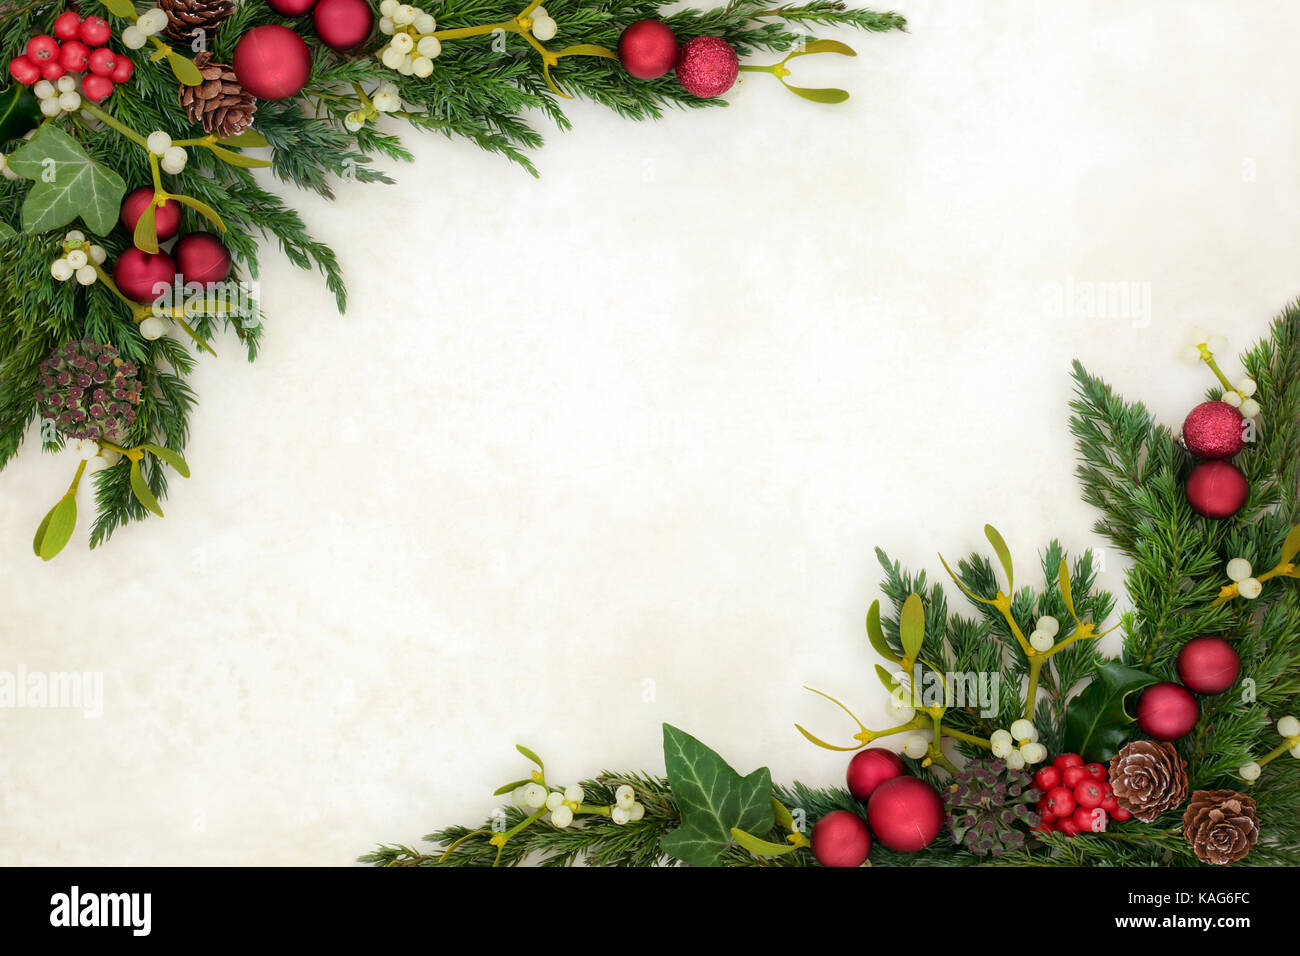 https://c8.alamy.com/comp/KAG6FC/christmas-decorative-background-border-on-parchment-paper-with-red-KAG6FC.jpg